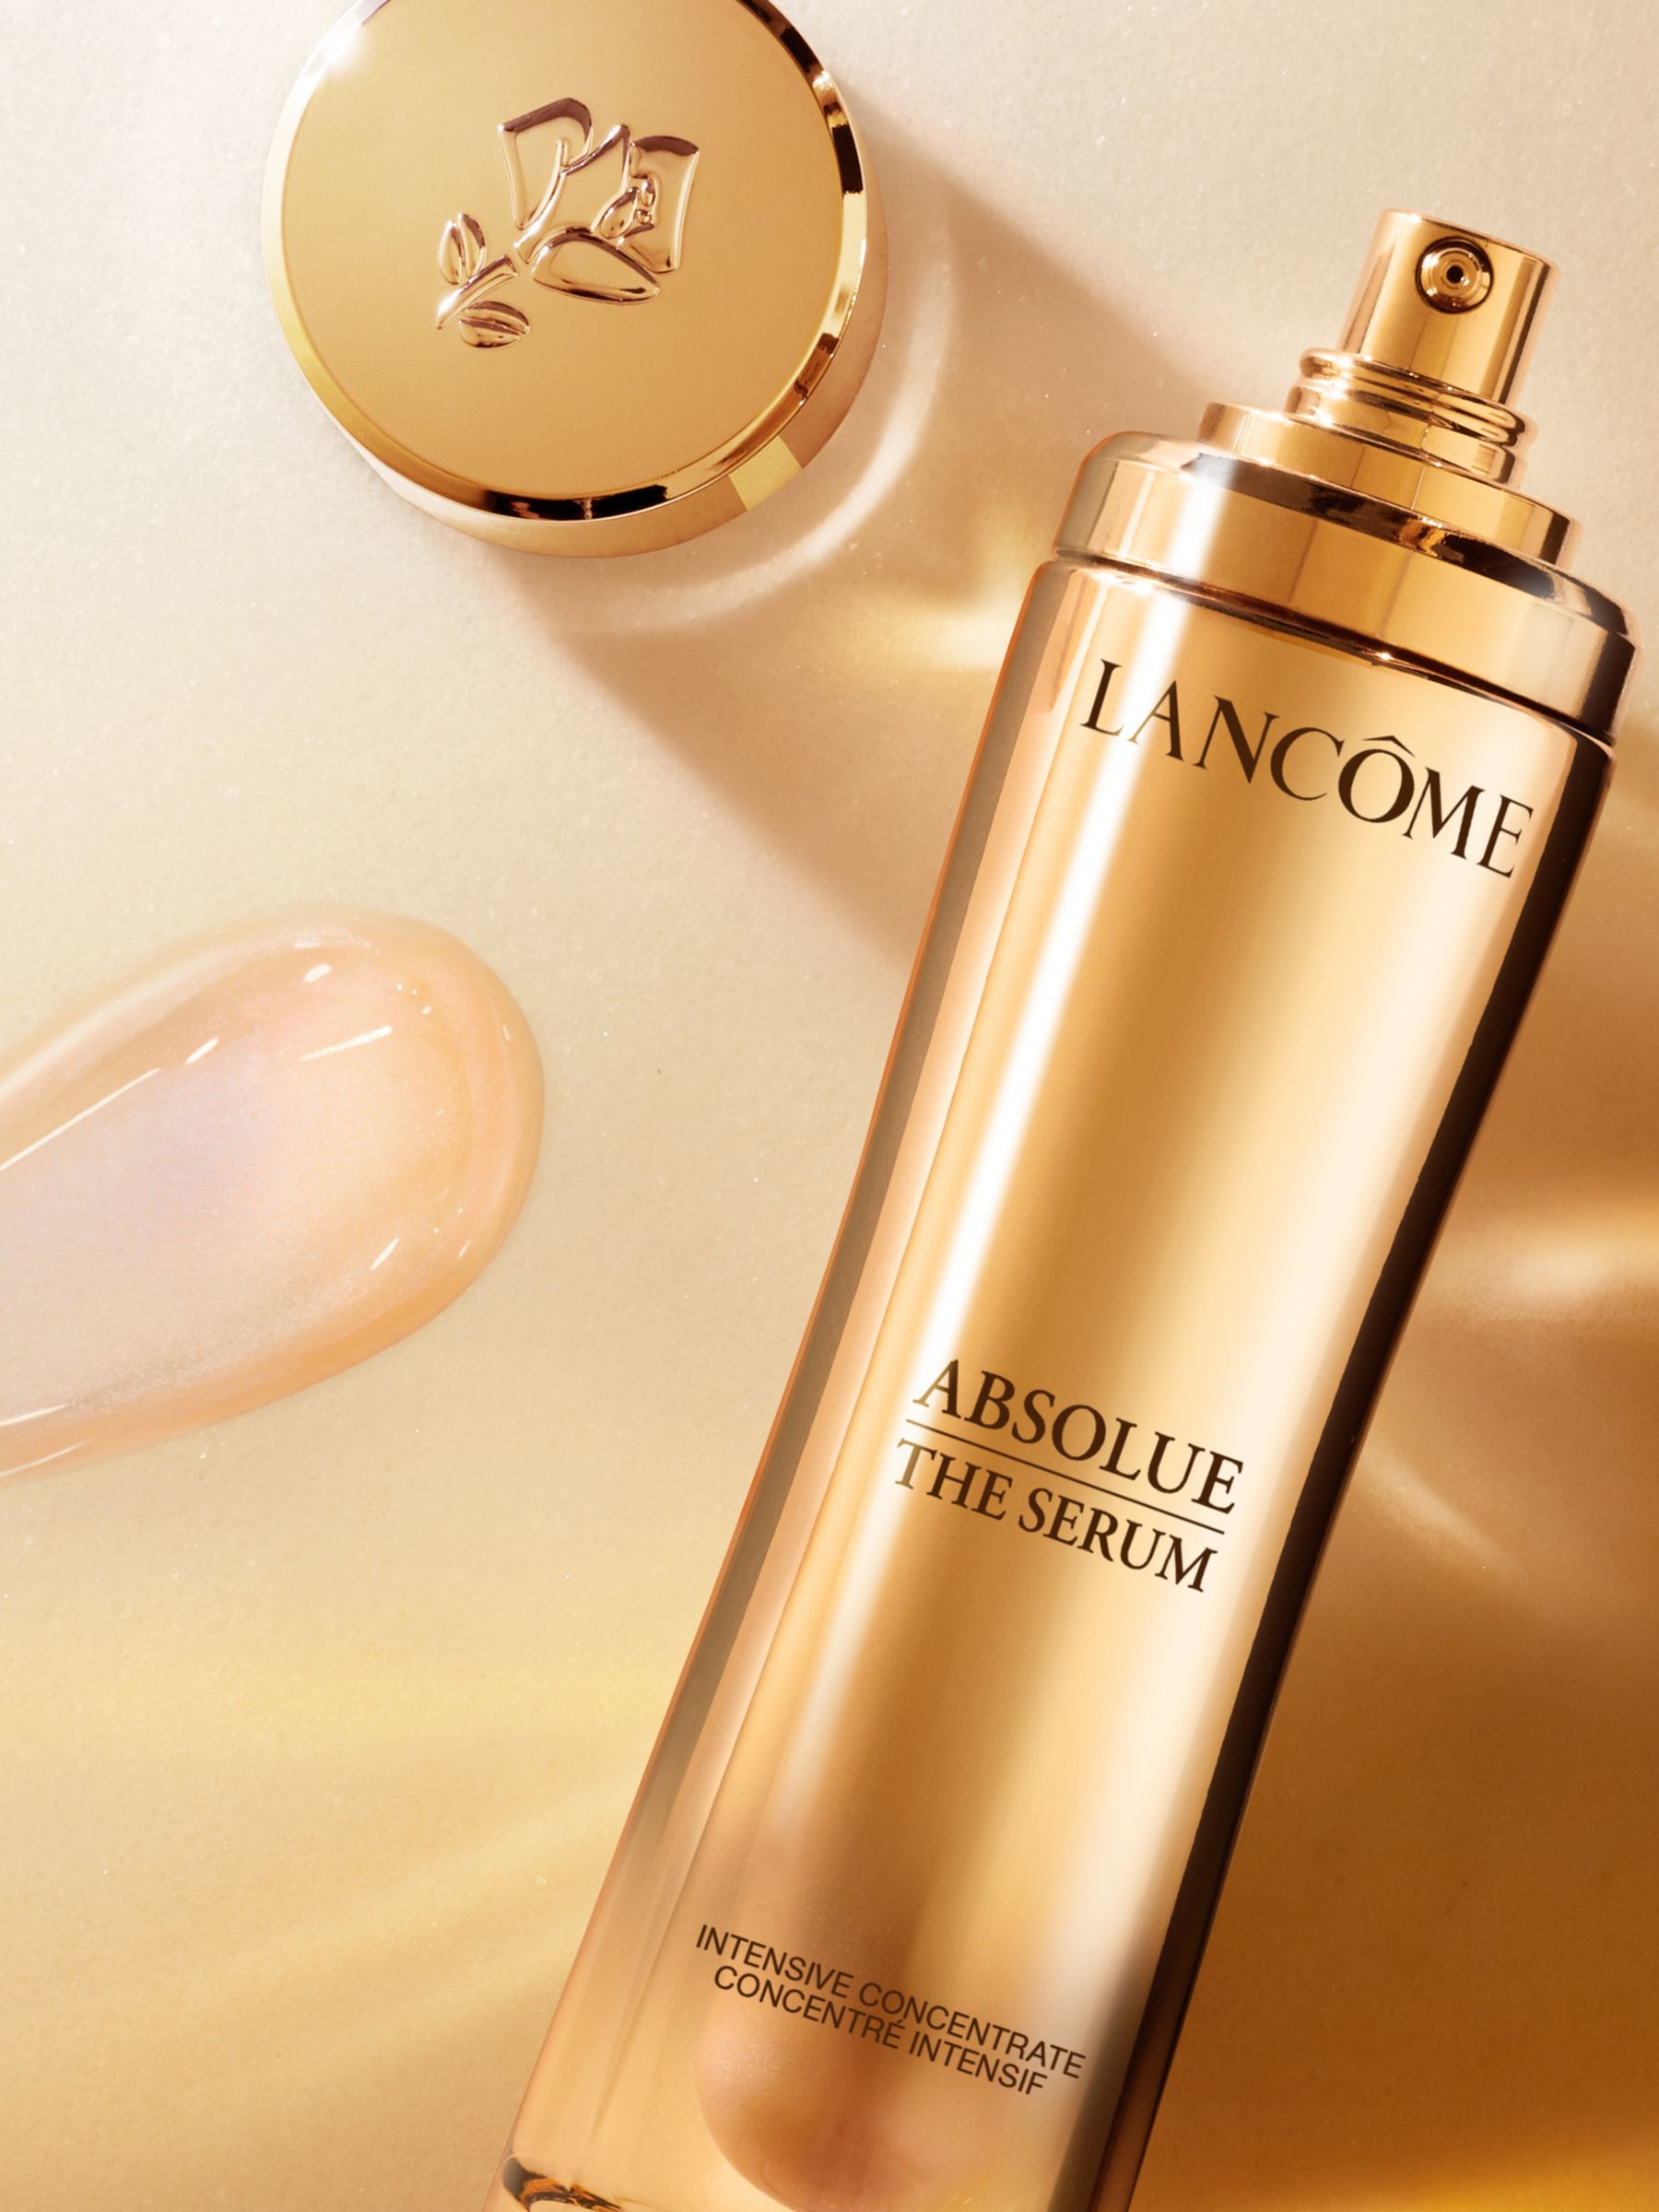 Lancôme Absolue The Serum Intensive Concentrate, Refill, 30ml